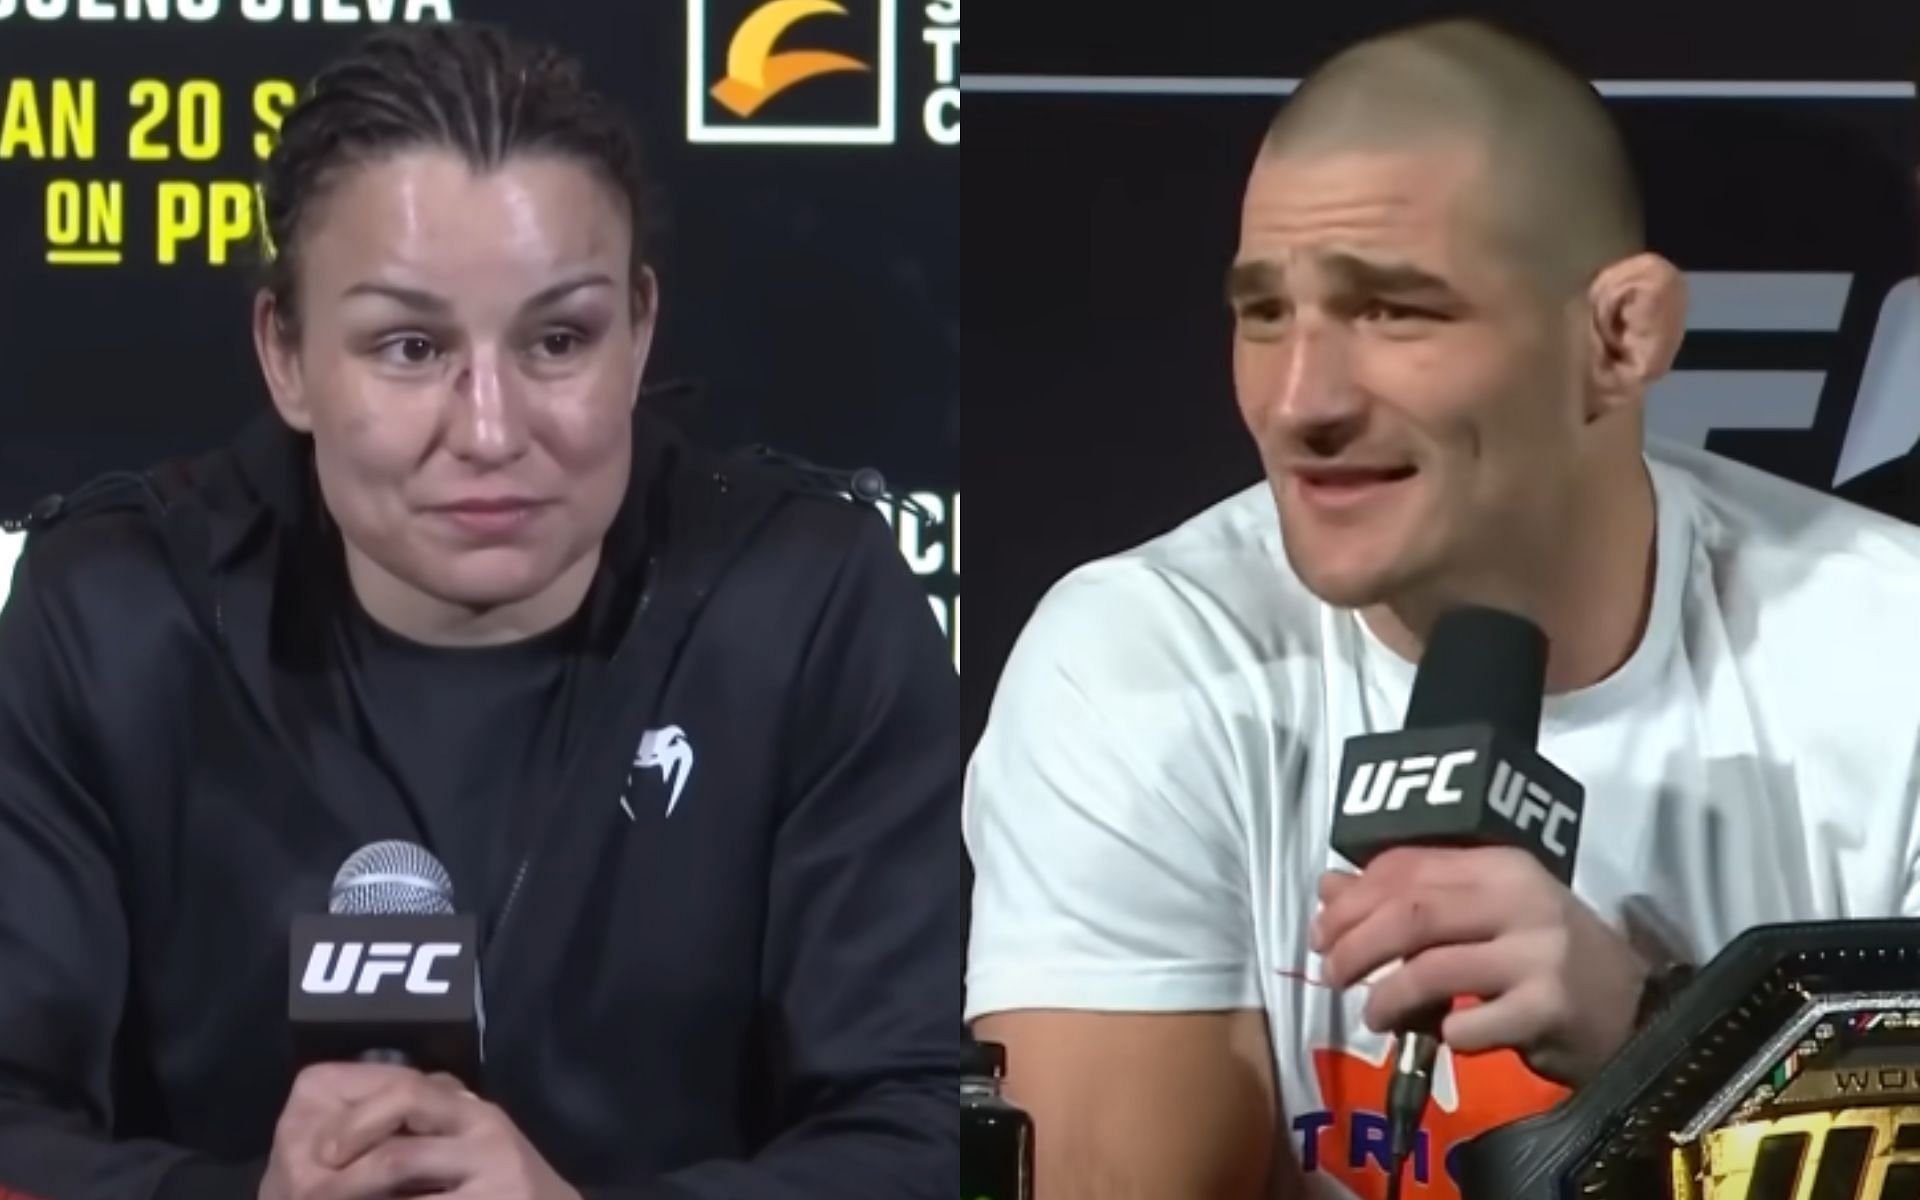 Raquel Pennington [Left] blasted Sean Strickland [Right] for recent comments [Image courtesy: UFC - YouTube]